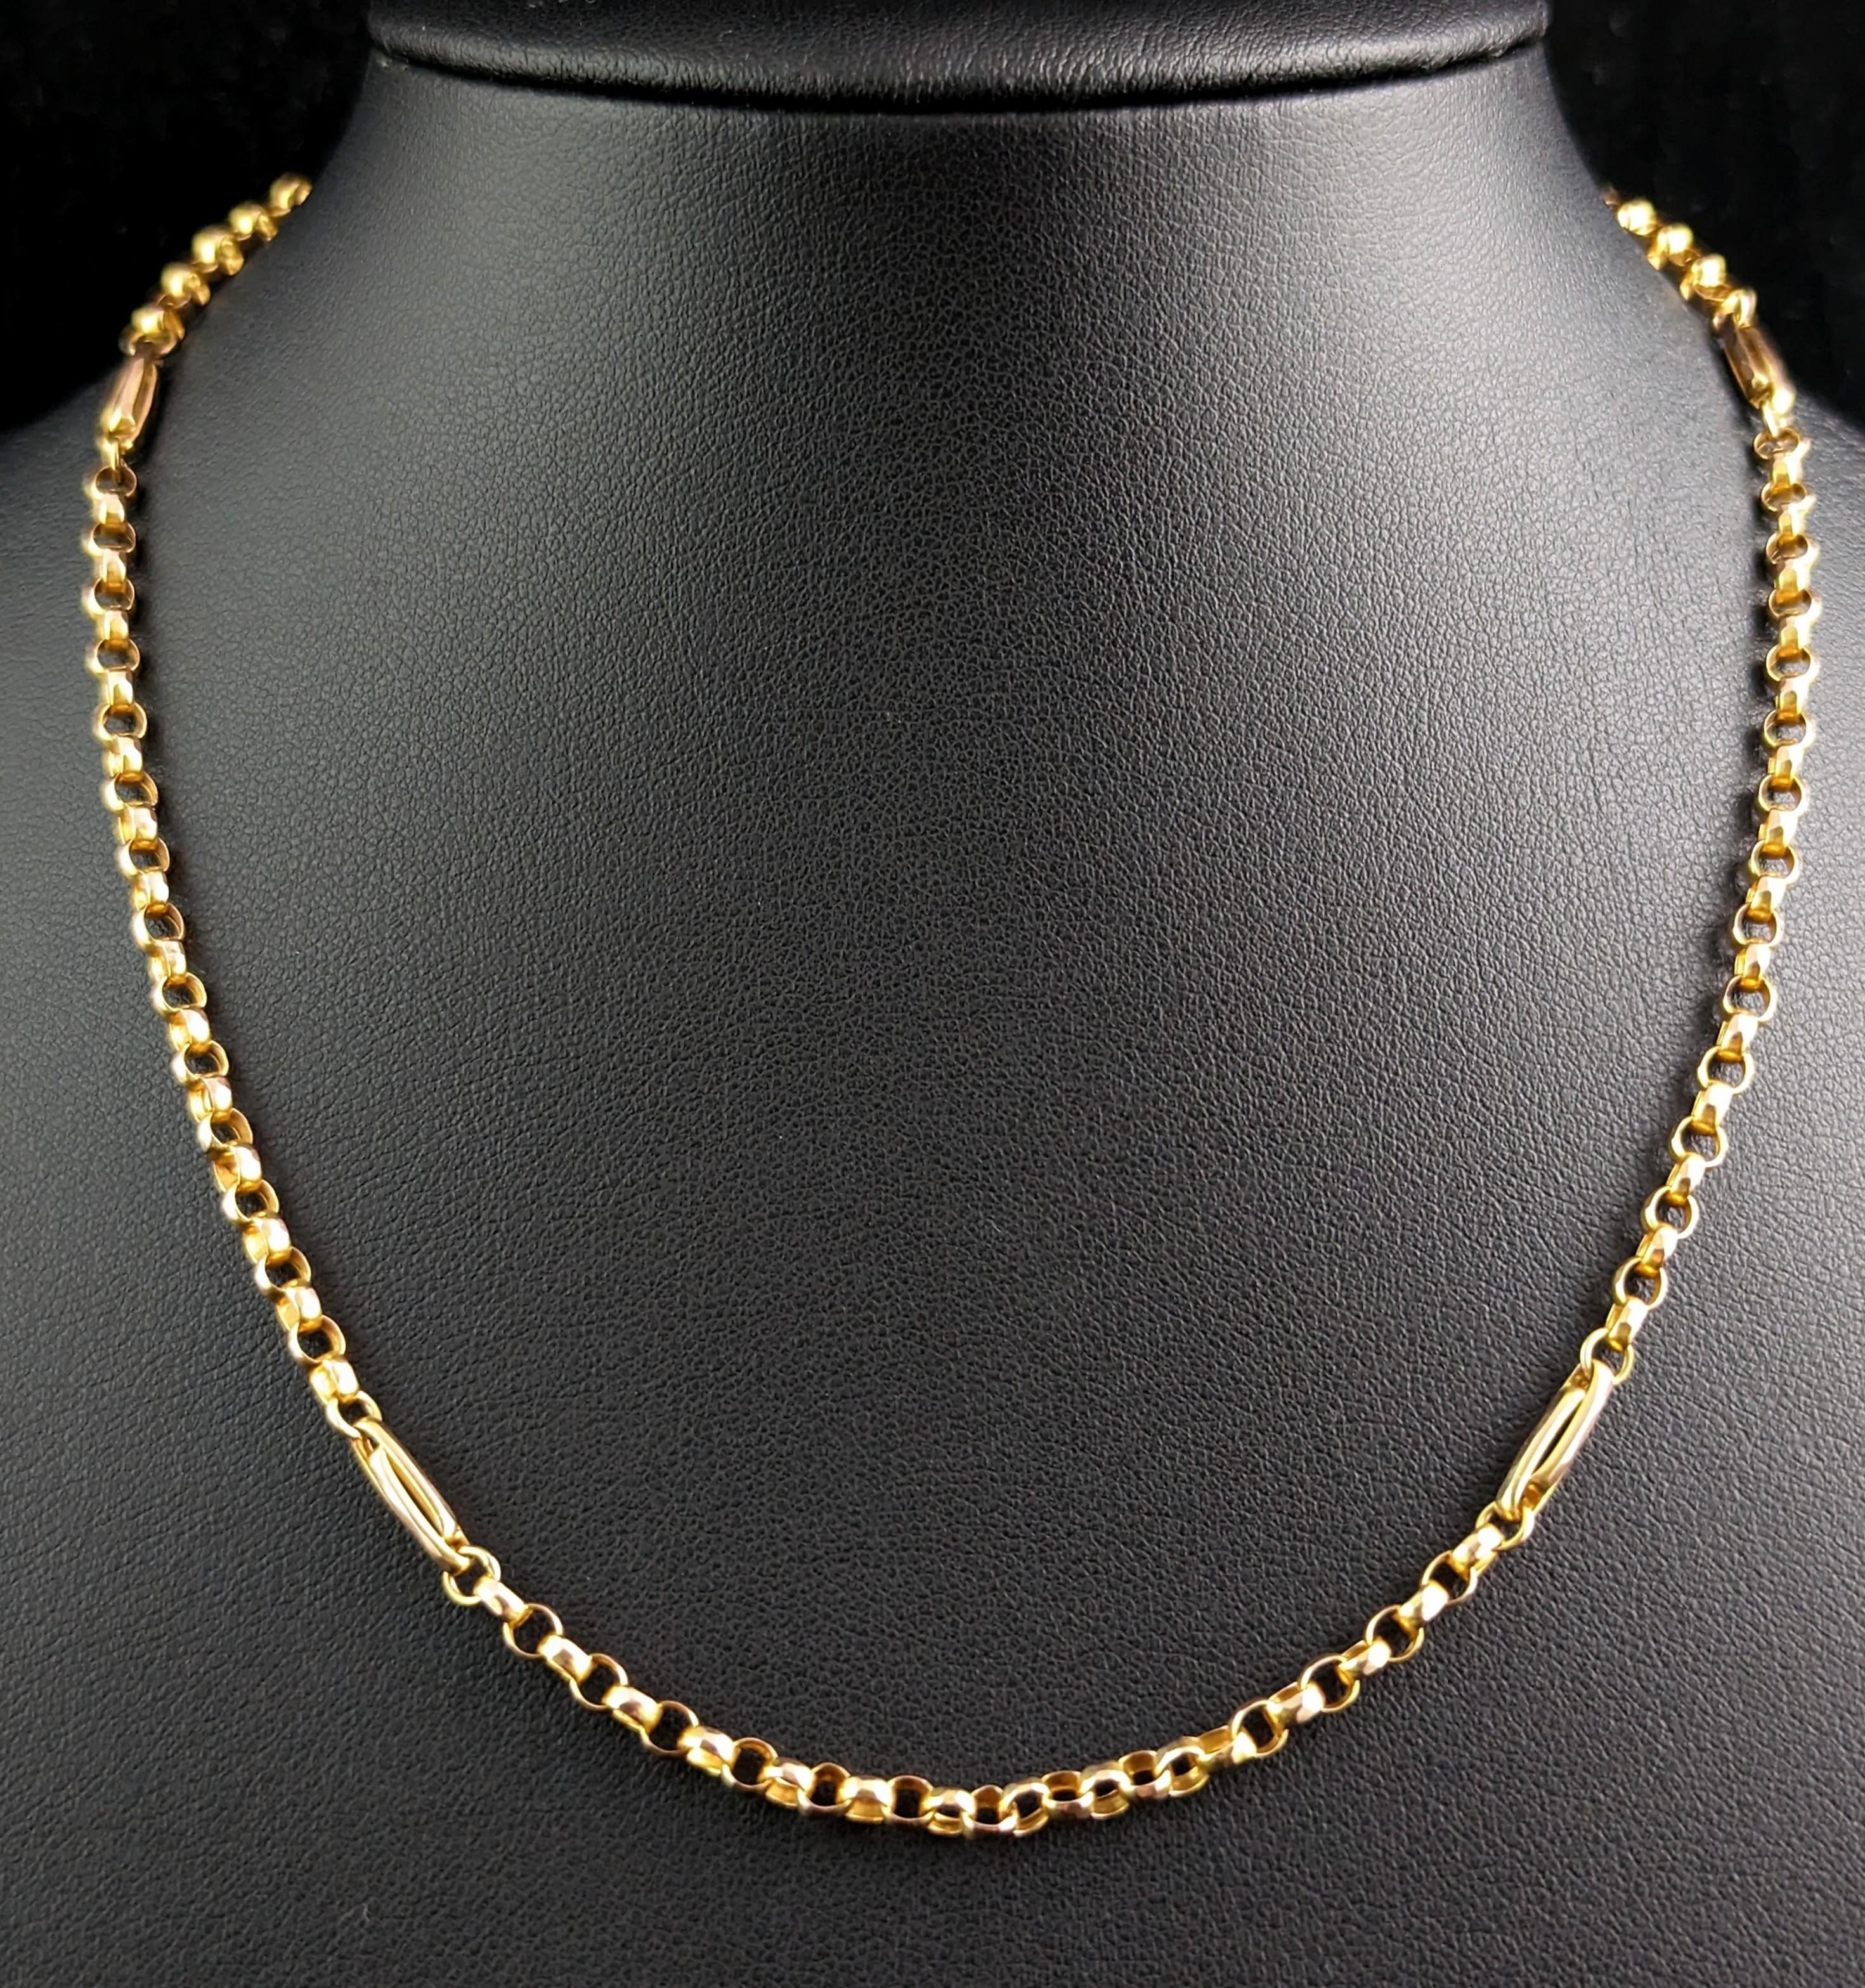 You can't go wrong with the staple that is an antique gold chain.

These are one of the most versatile and wearable pieces of antique jewellery and also one of the most sought after and you can see why.

This chain has lovely rolo links intercepted